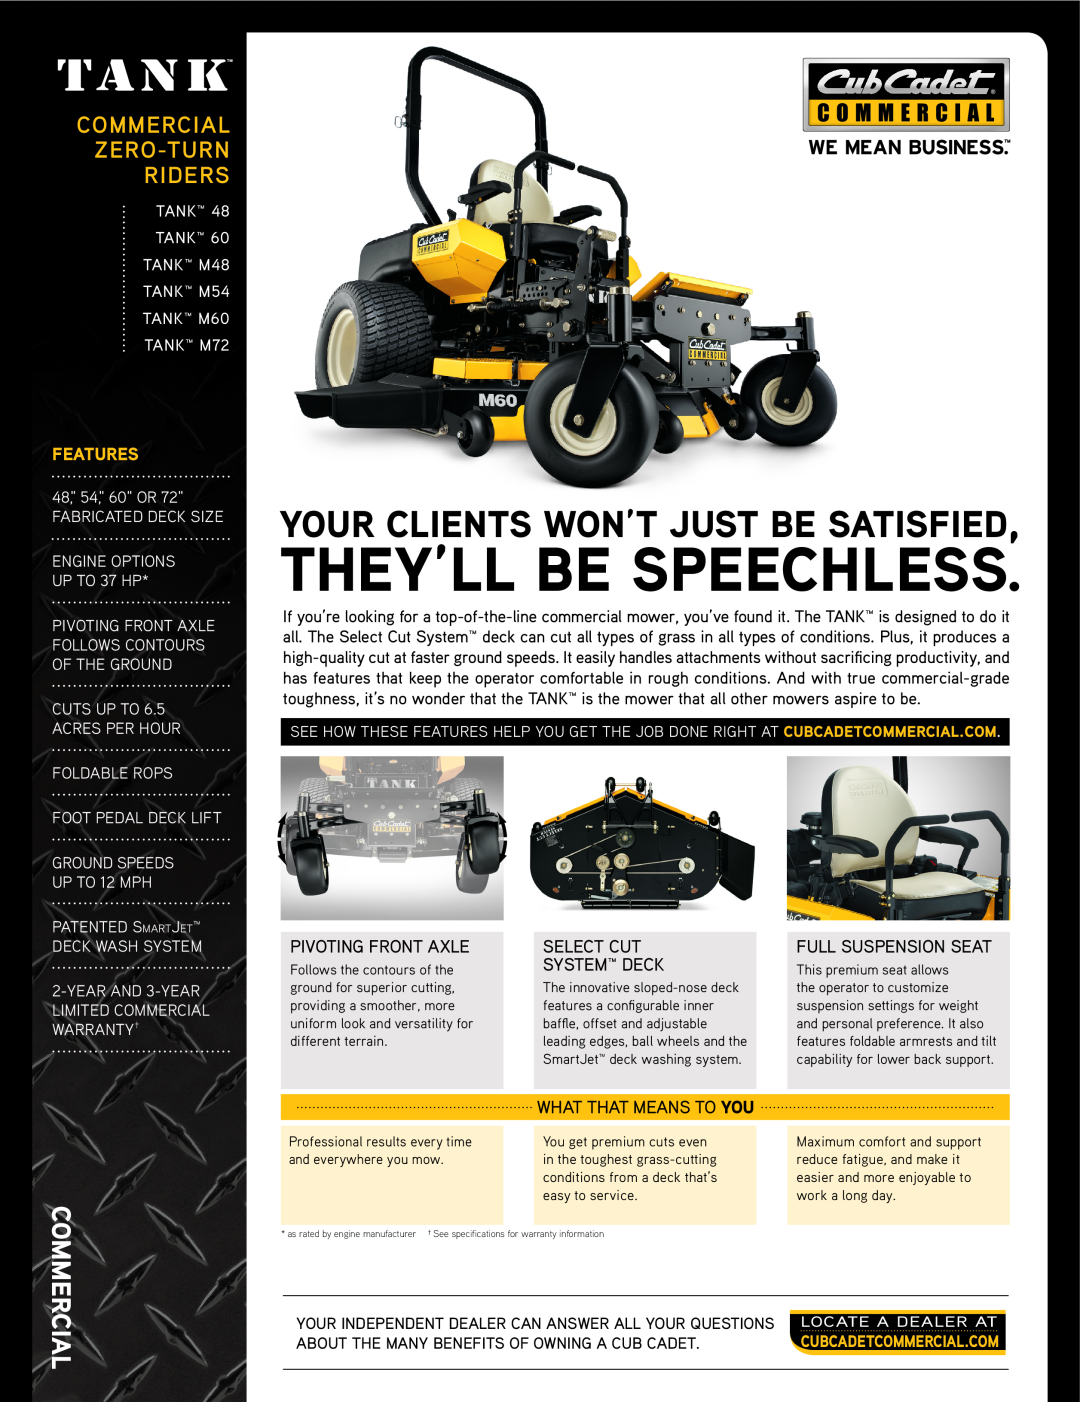 Cub Cadet 54, 48 warranty Z-Force, Spend More Time Off It, We Put More In It So You Can, Cubcadet.Com, Easier To Operate 